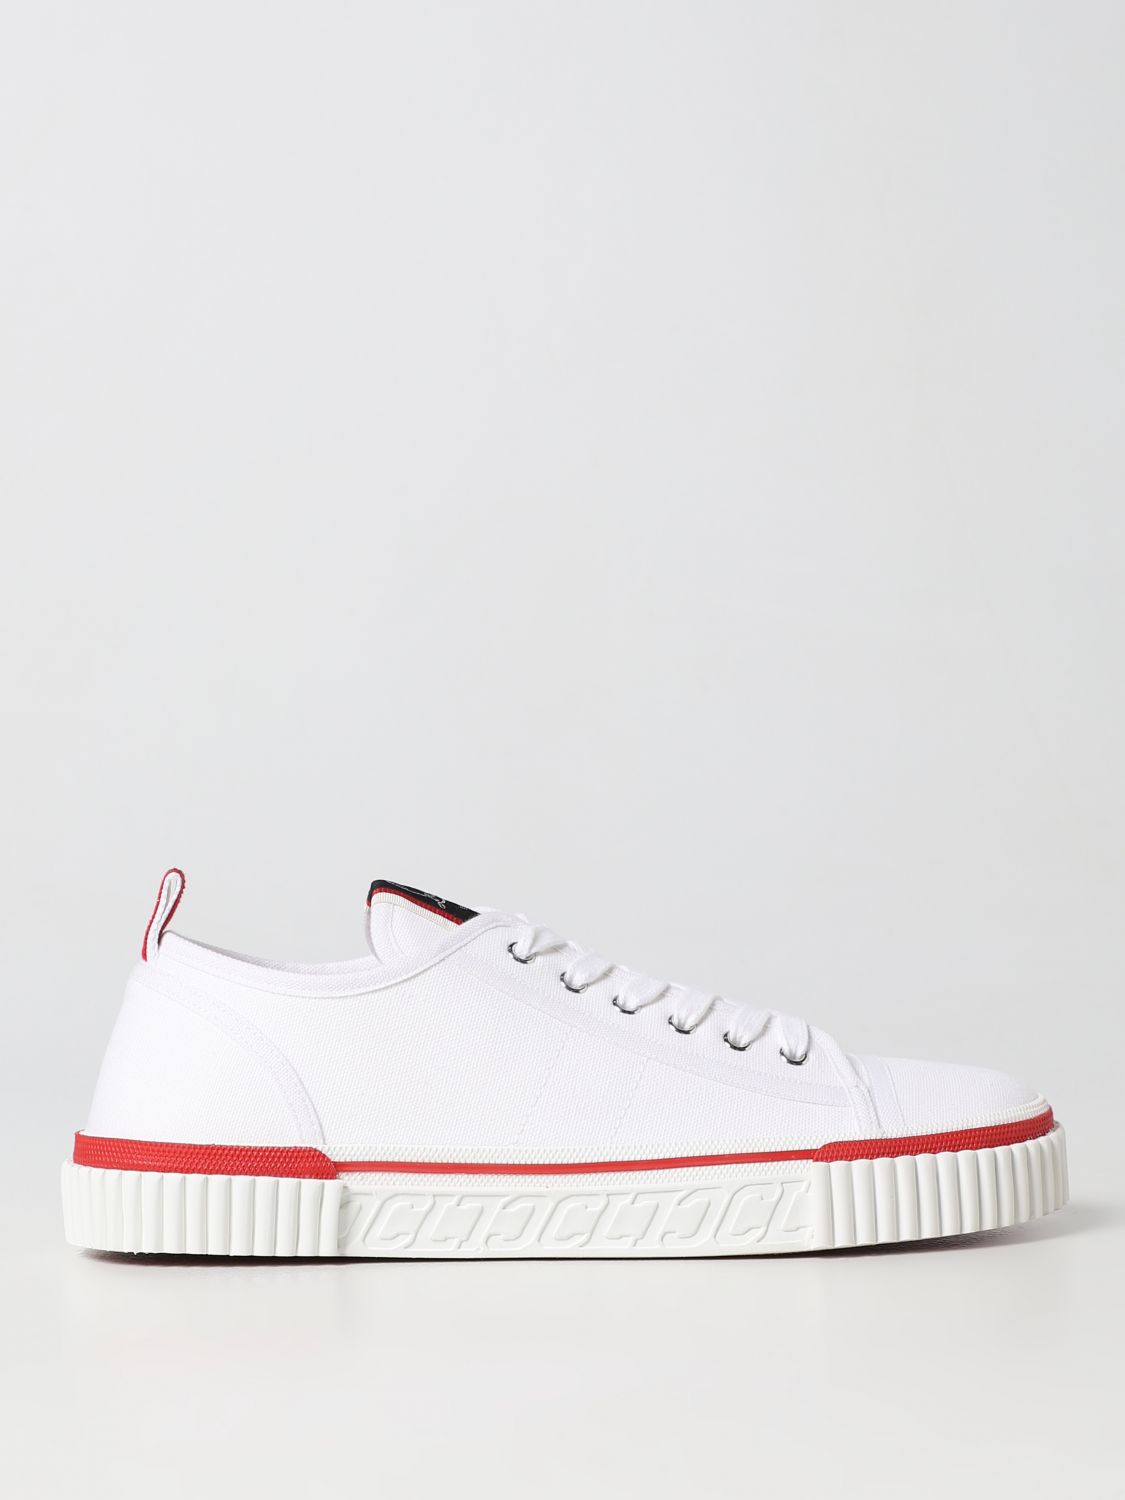 CHRISTIAN LOUBOUTIN PEDRO JUNIOR SNEAKERS IN CANVAS,389108001